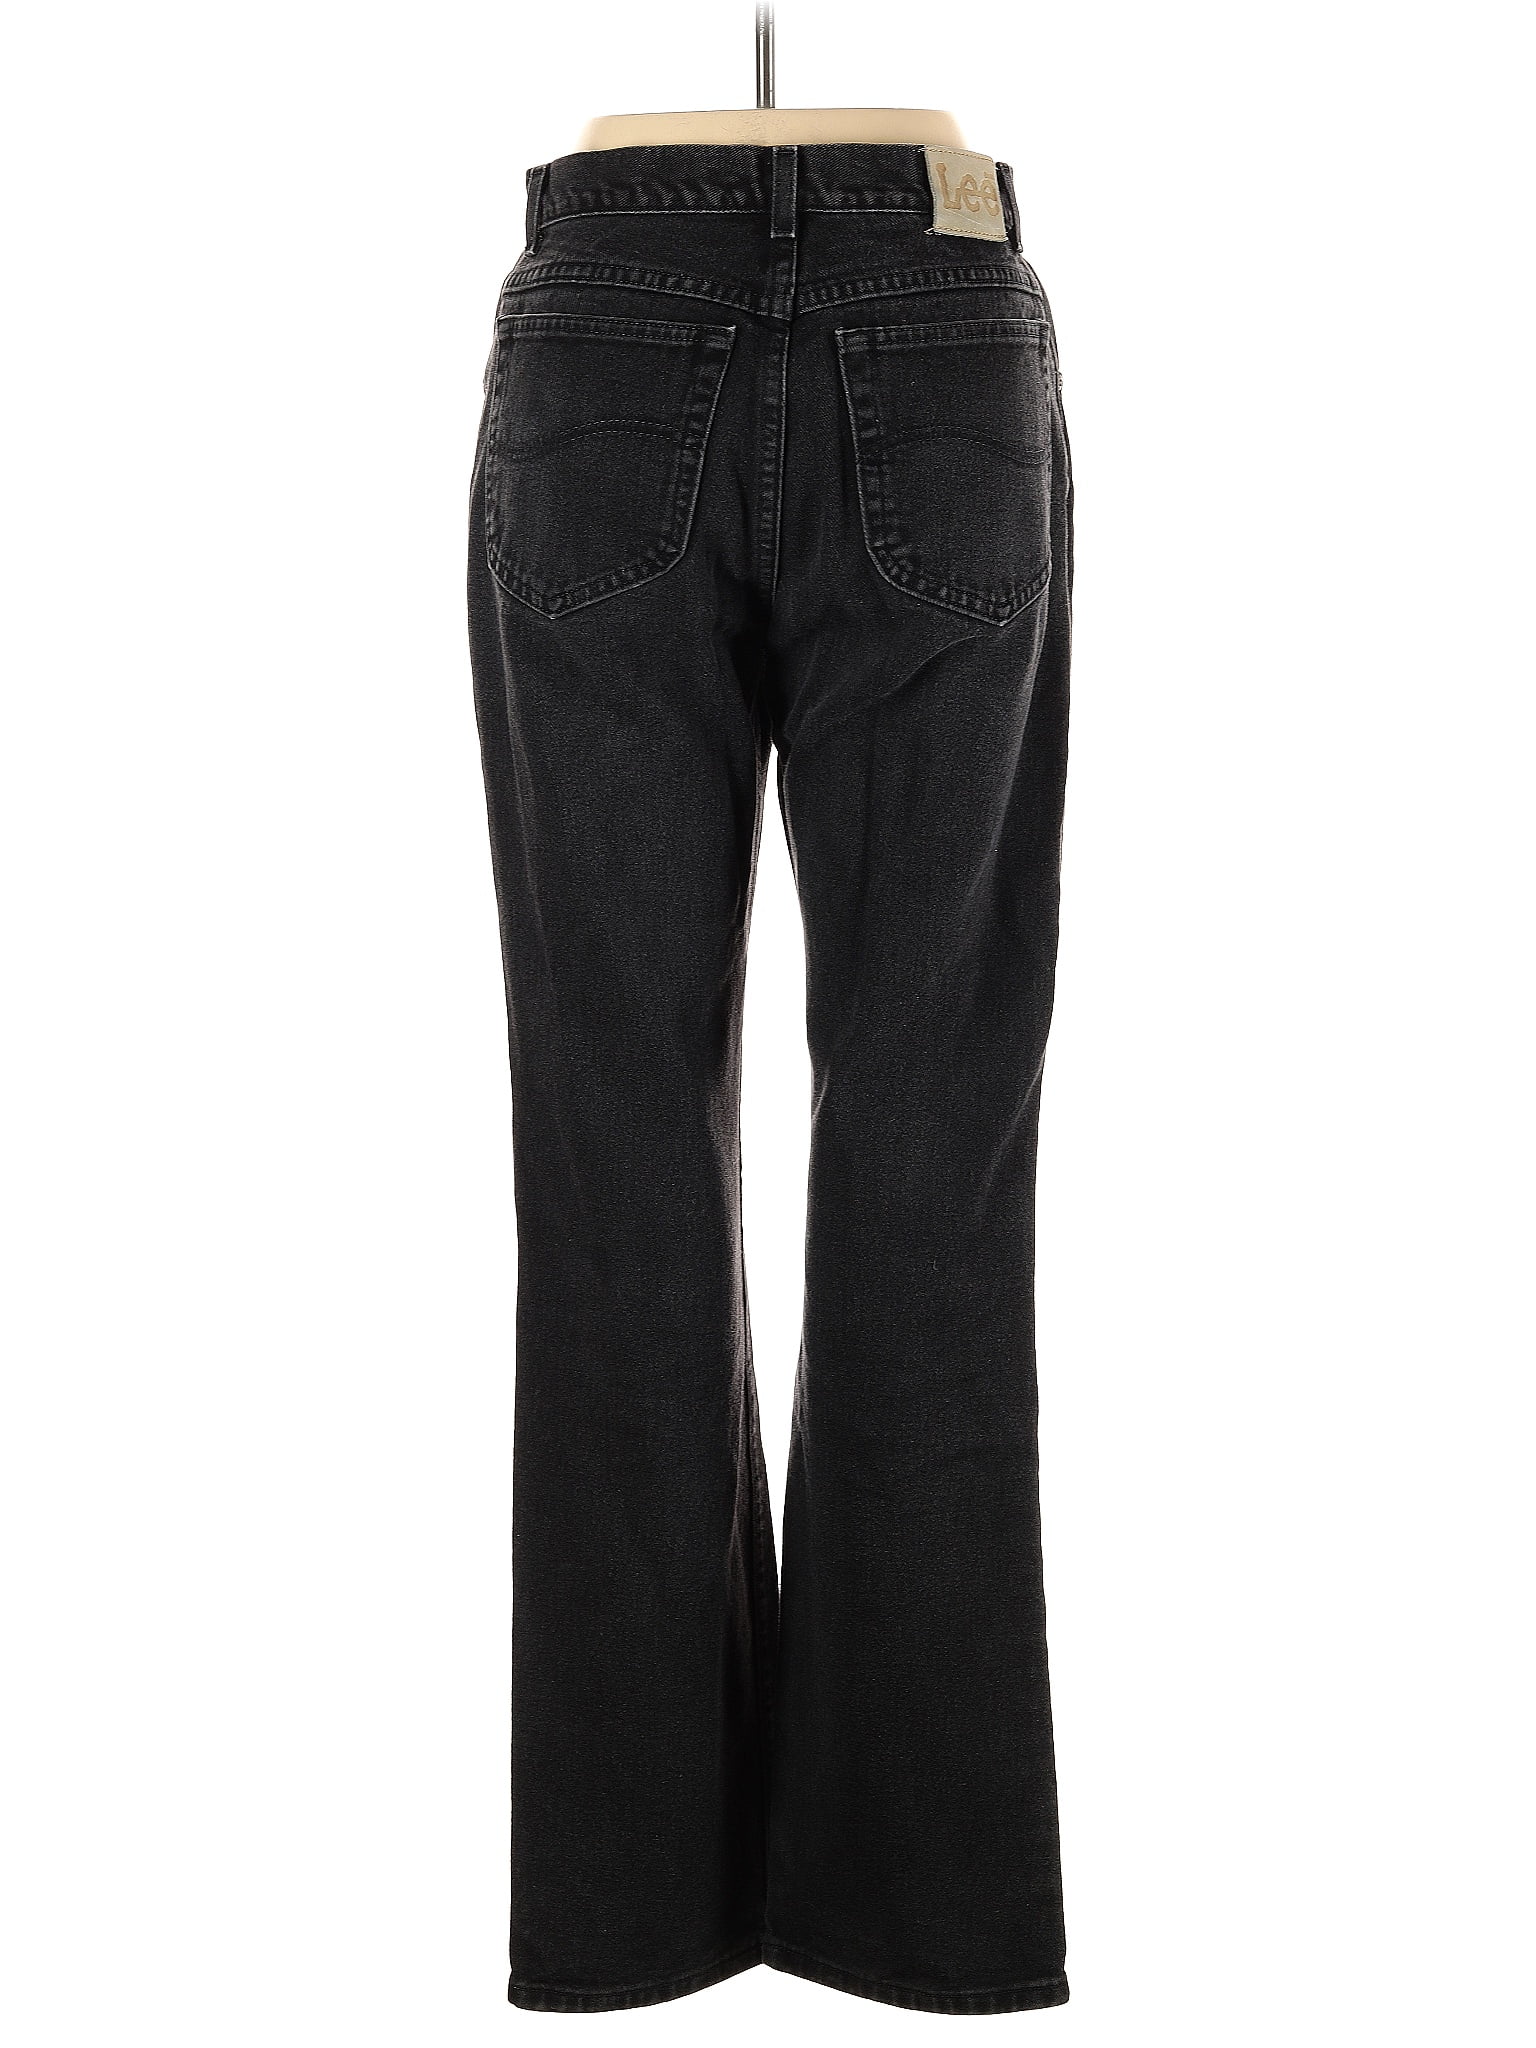 Lee Solid Black Casual Pants Size 8 (Petite) - 64% off